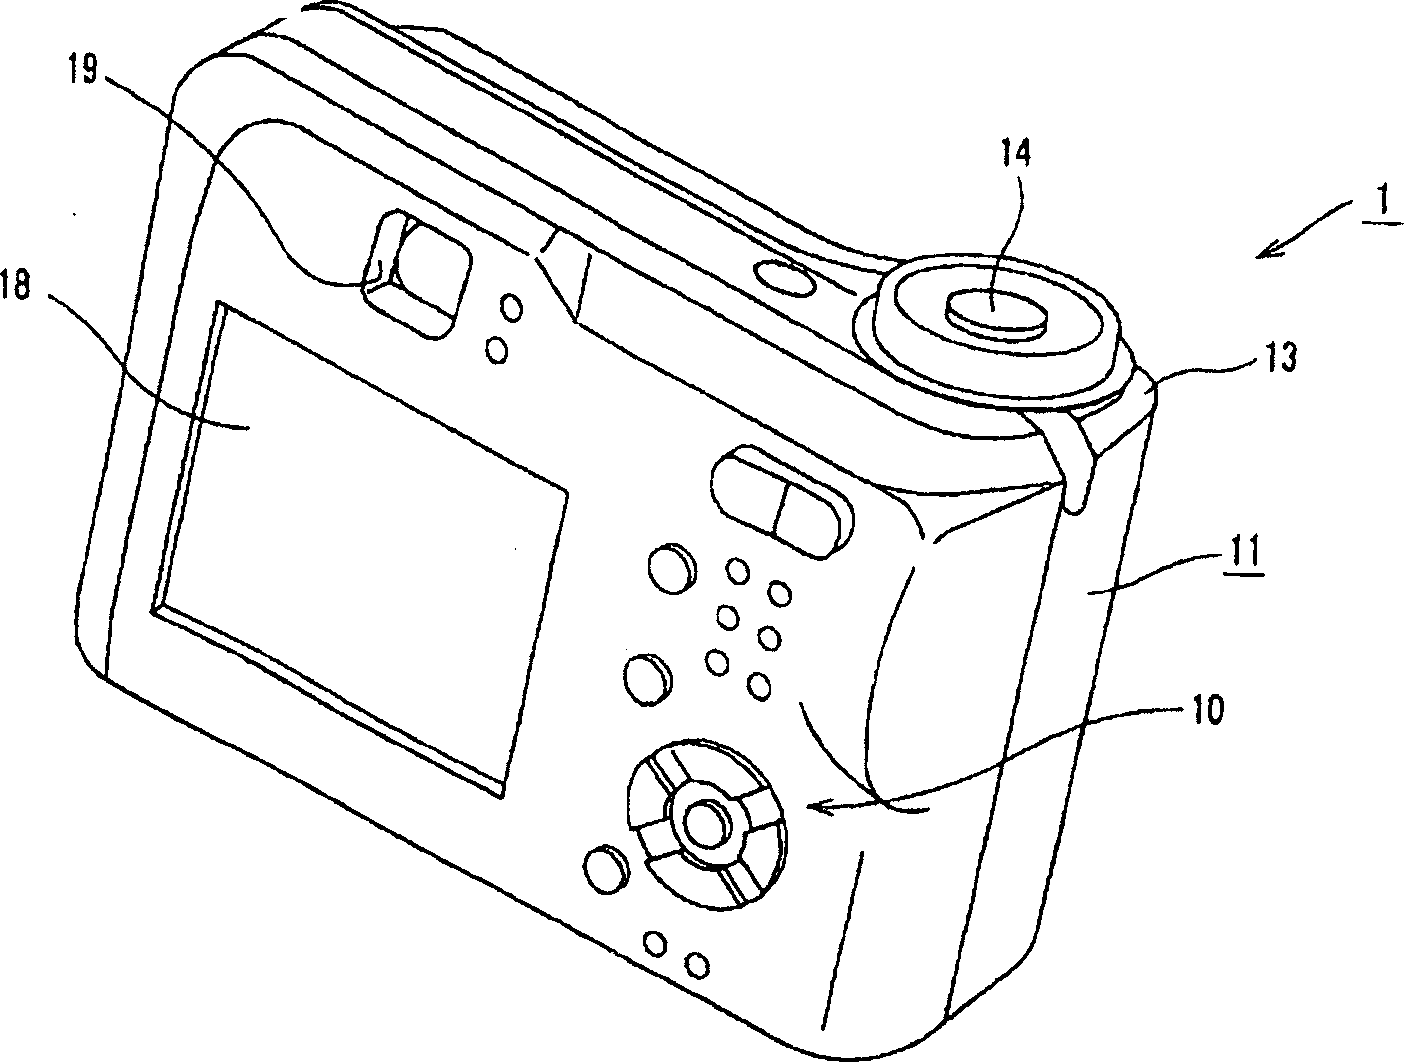 DC adaptor and electronic apparatus using the same